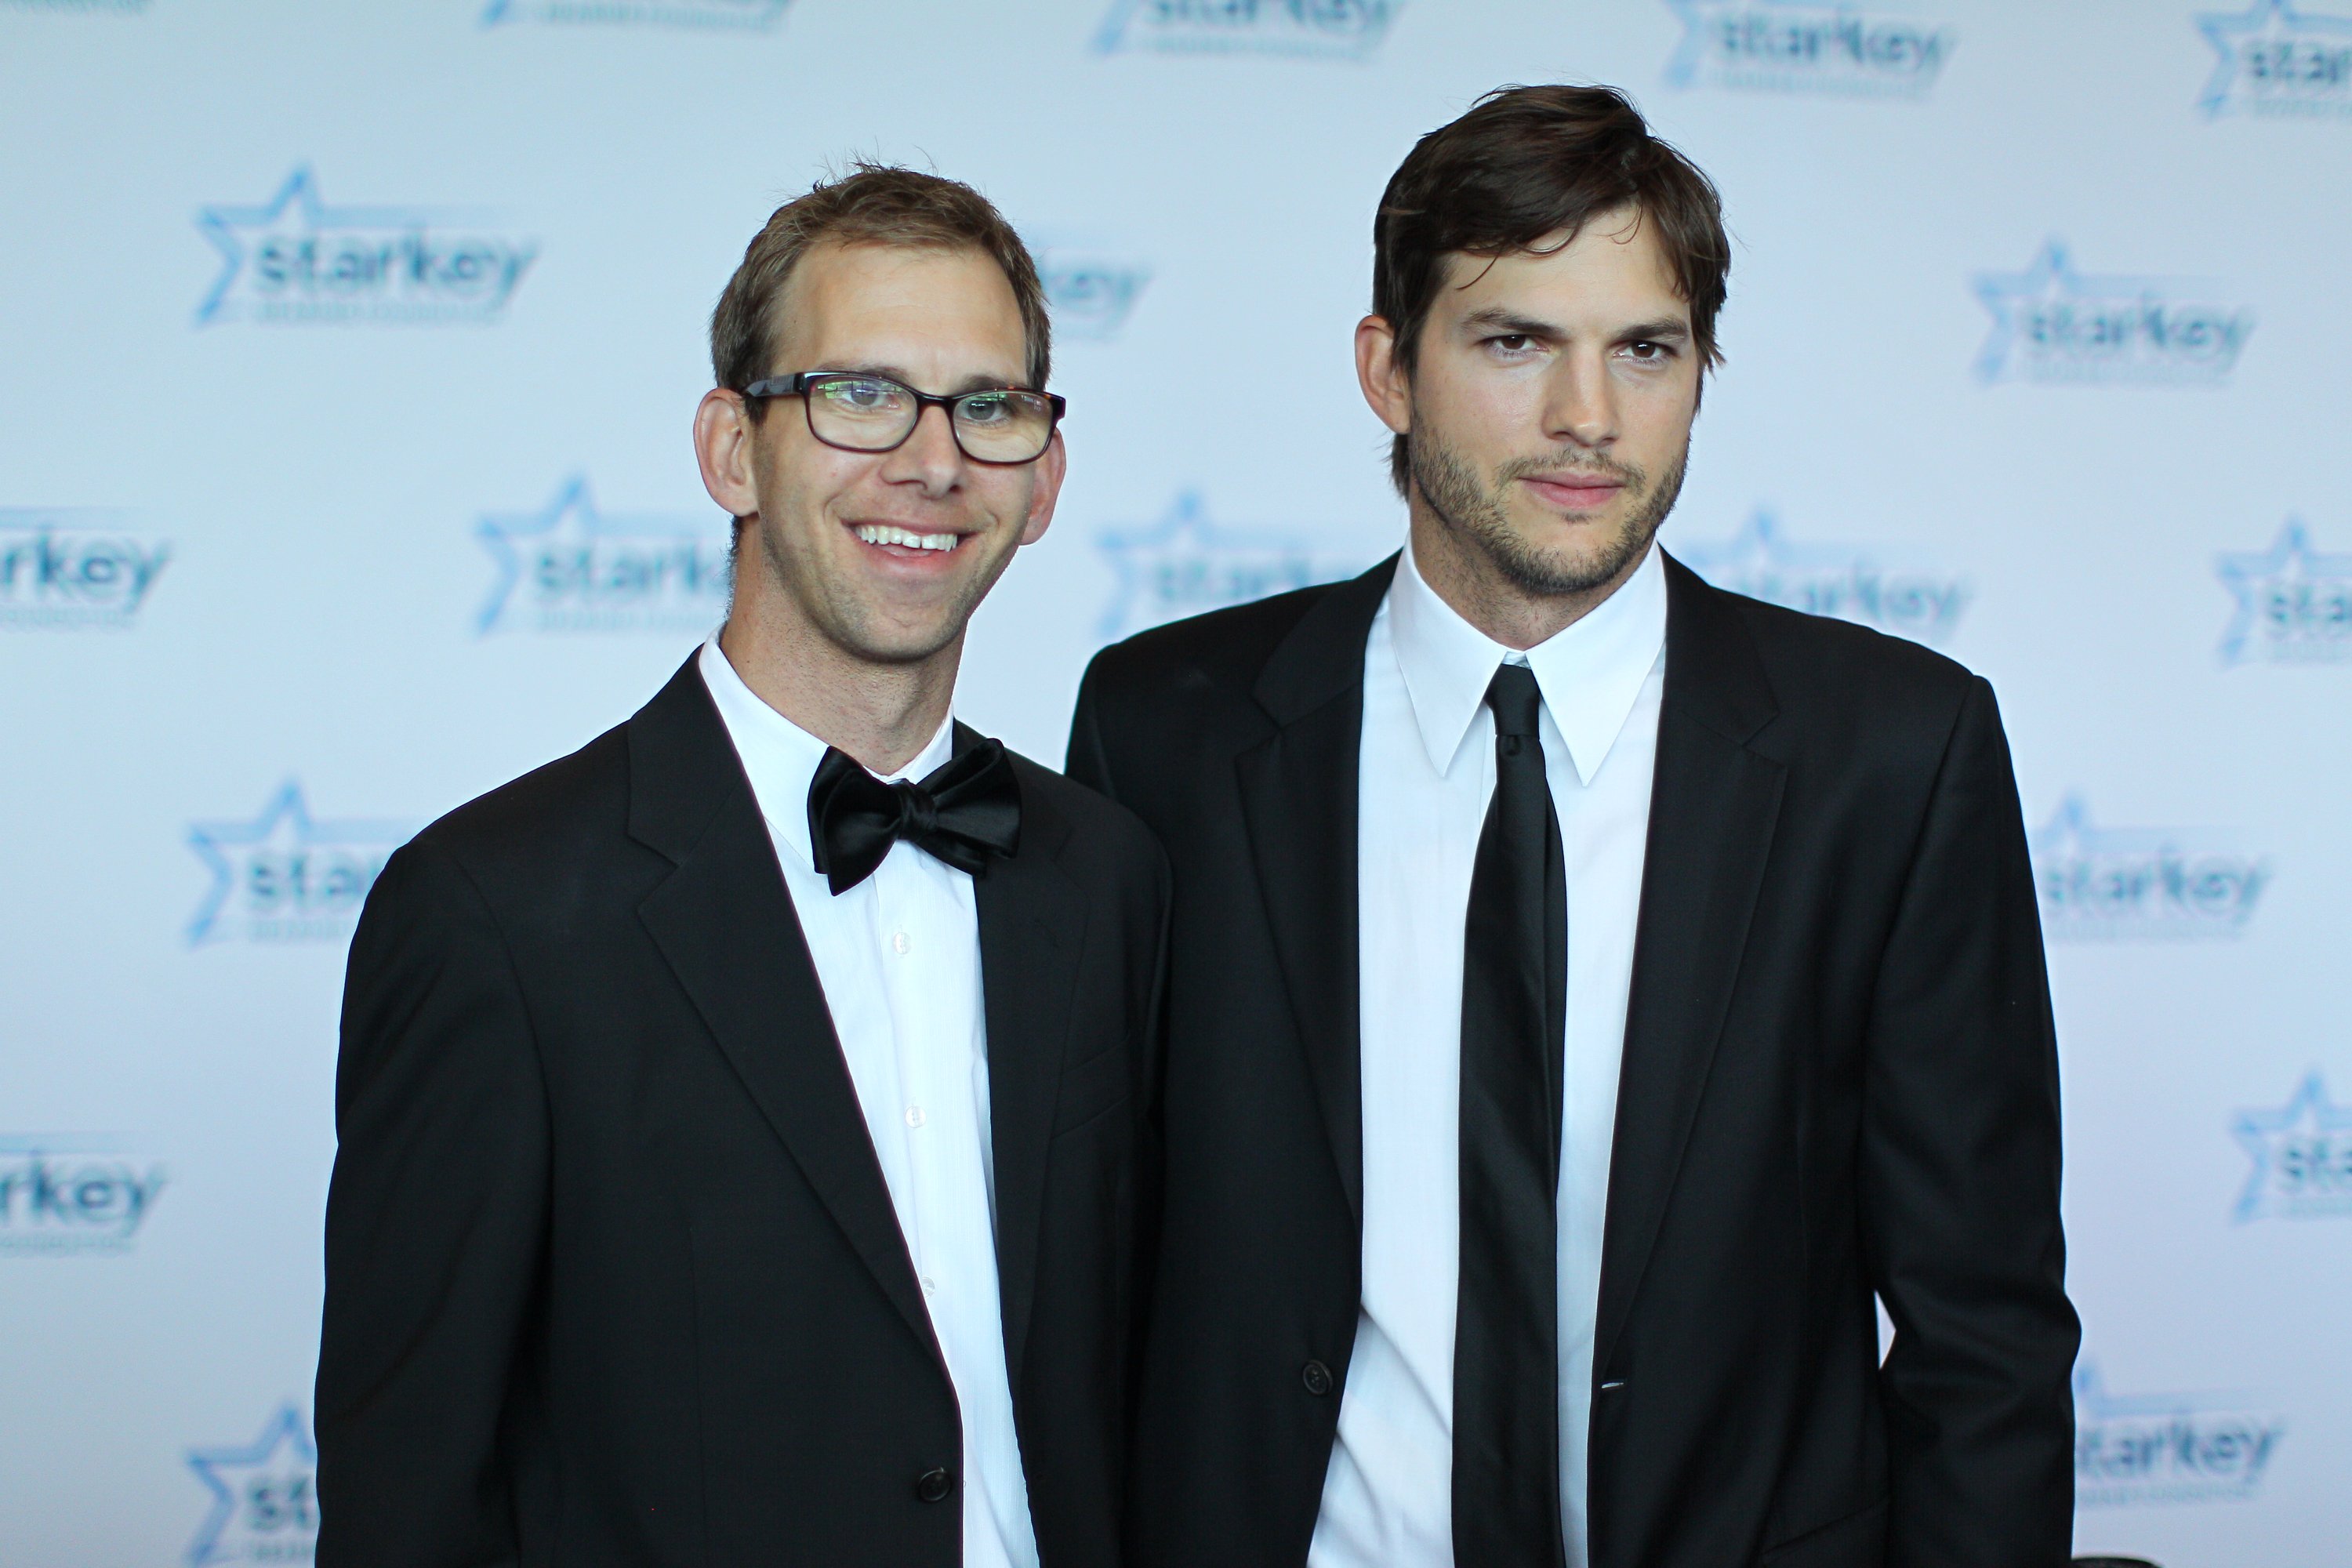  Michael Kutcher and brother Ashton Kutcher at the Starkey Hearing Foundation's "So the World May Hear" Awards Gala on July 28, 2013 in St. Paul, Minnesota